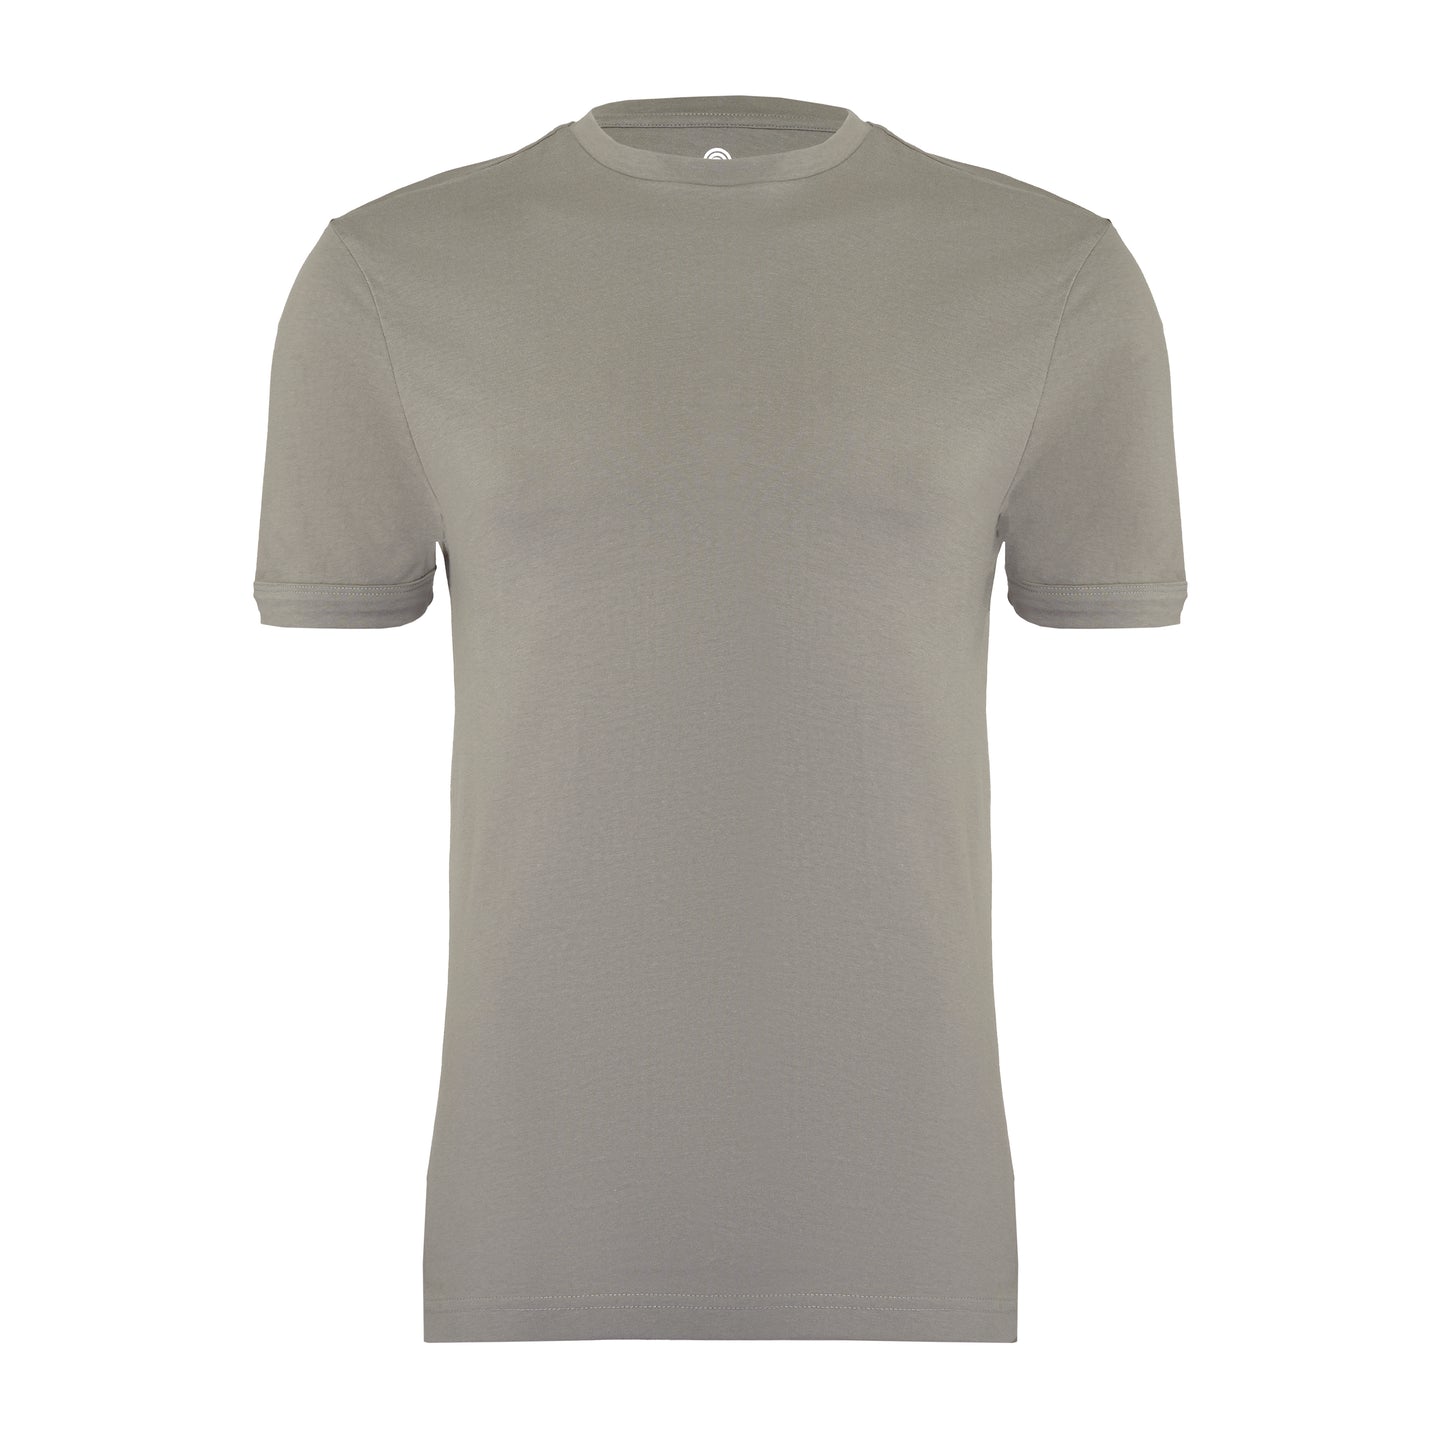 Round tight neck, ash grey, bodyfit T-shirt – pack of 2 or 4 tees